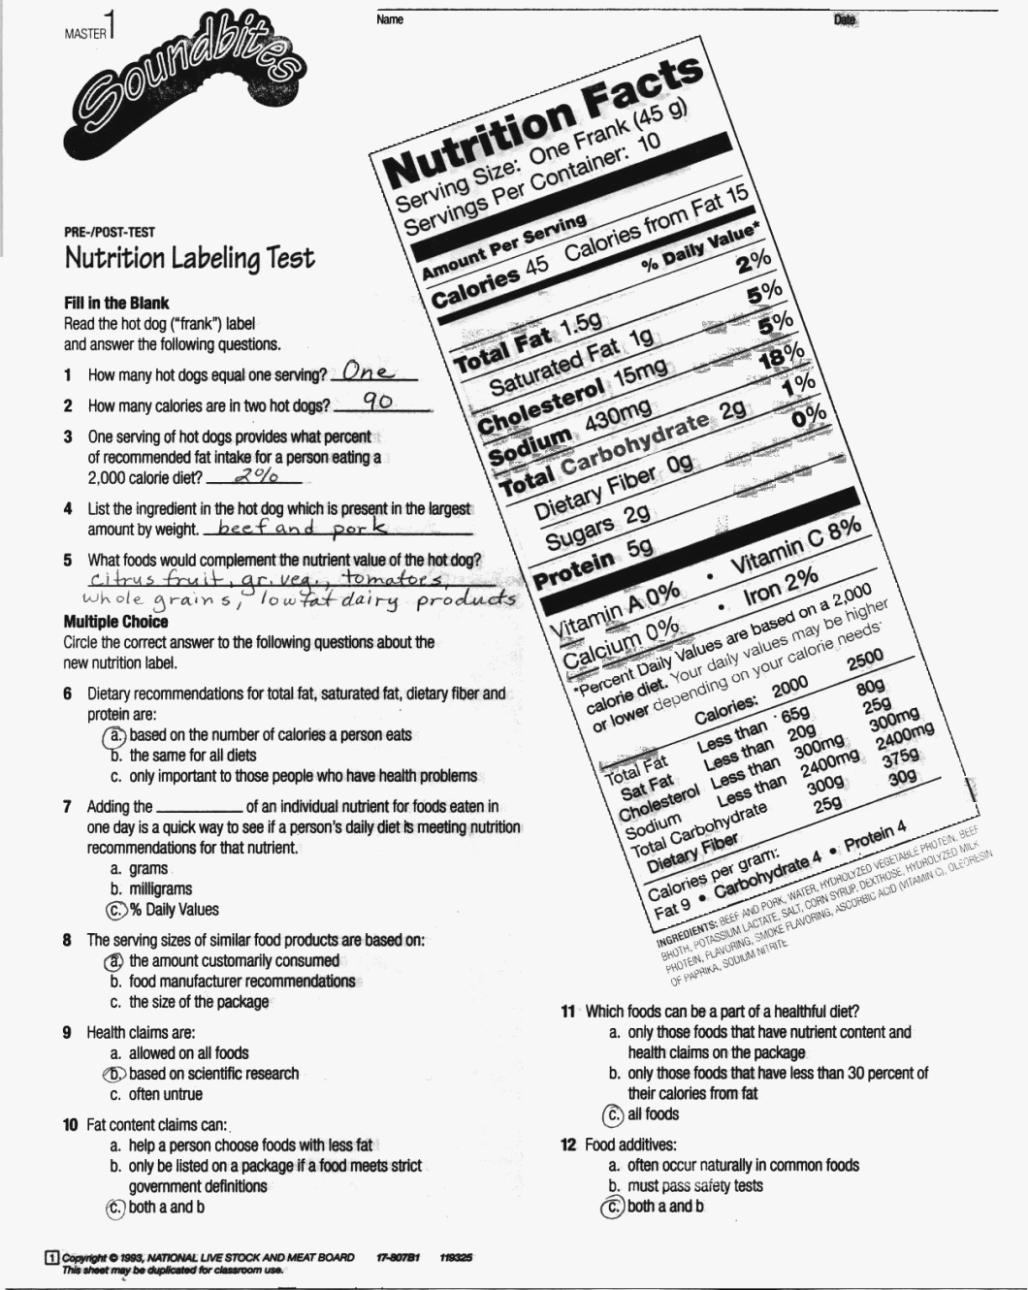 Nutrition Label Worksheet Answers Inspirational Nutrition Label Worksheet Answer Key Pdf – Blog Dandk